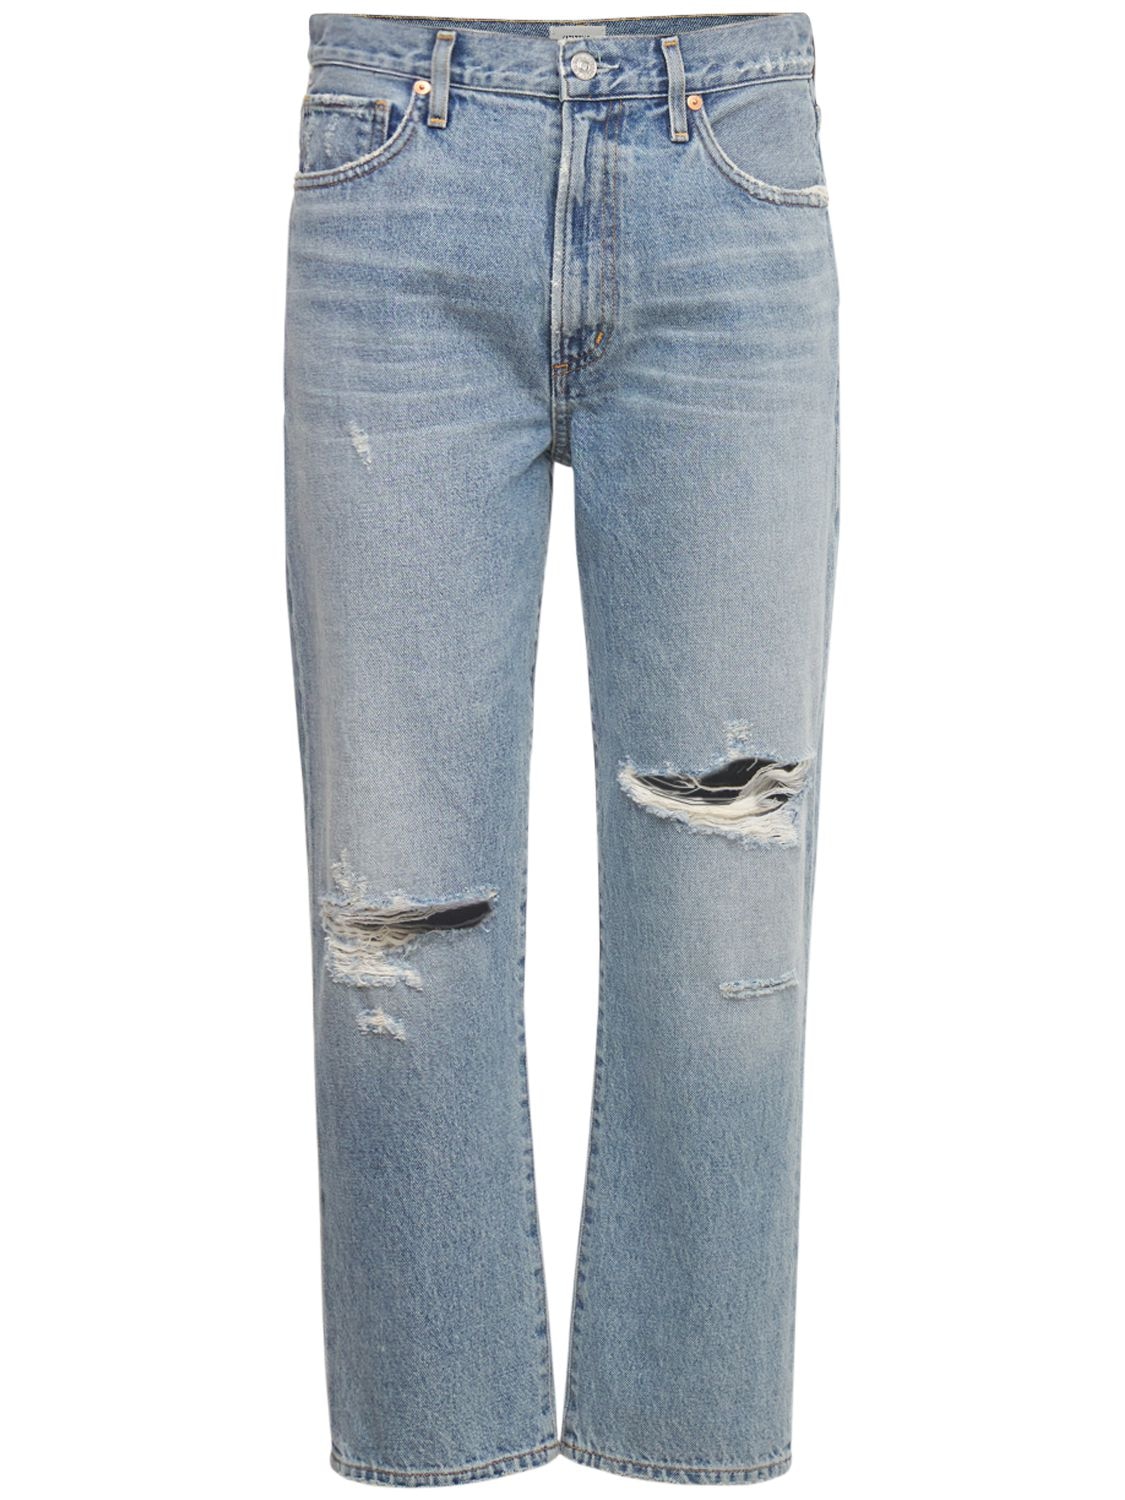 Jeans Relaxed Fit Marlee In Denim Di Cotone - CITIZENS OF HUMANITY - Modalova